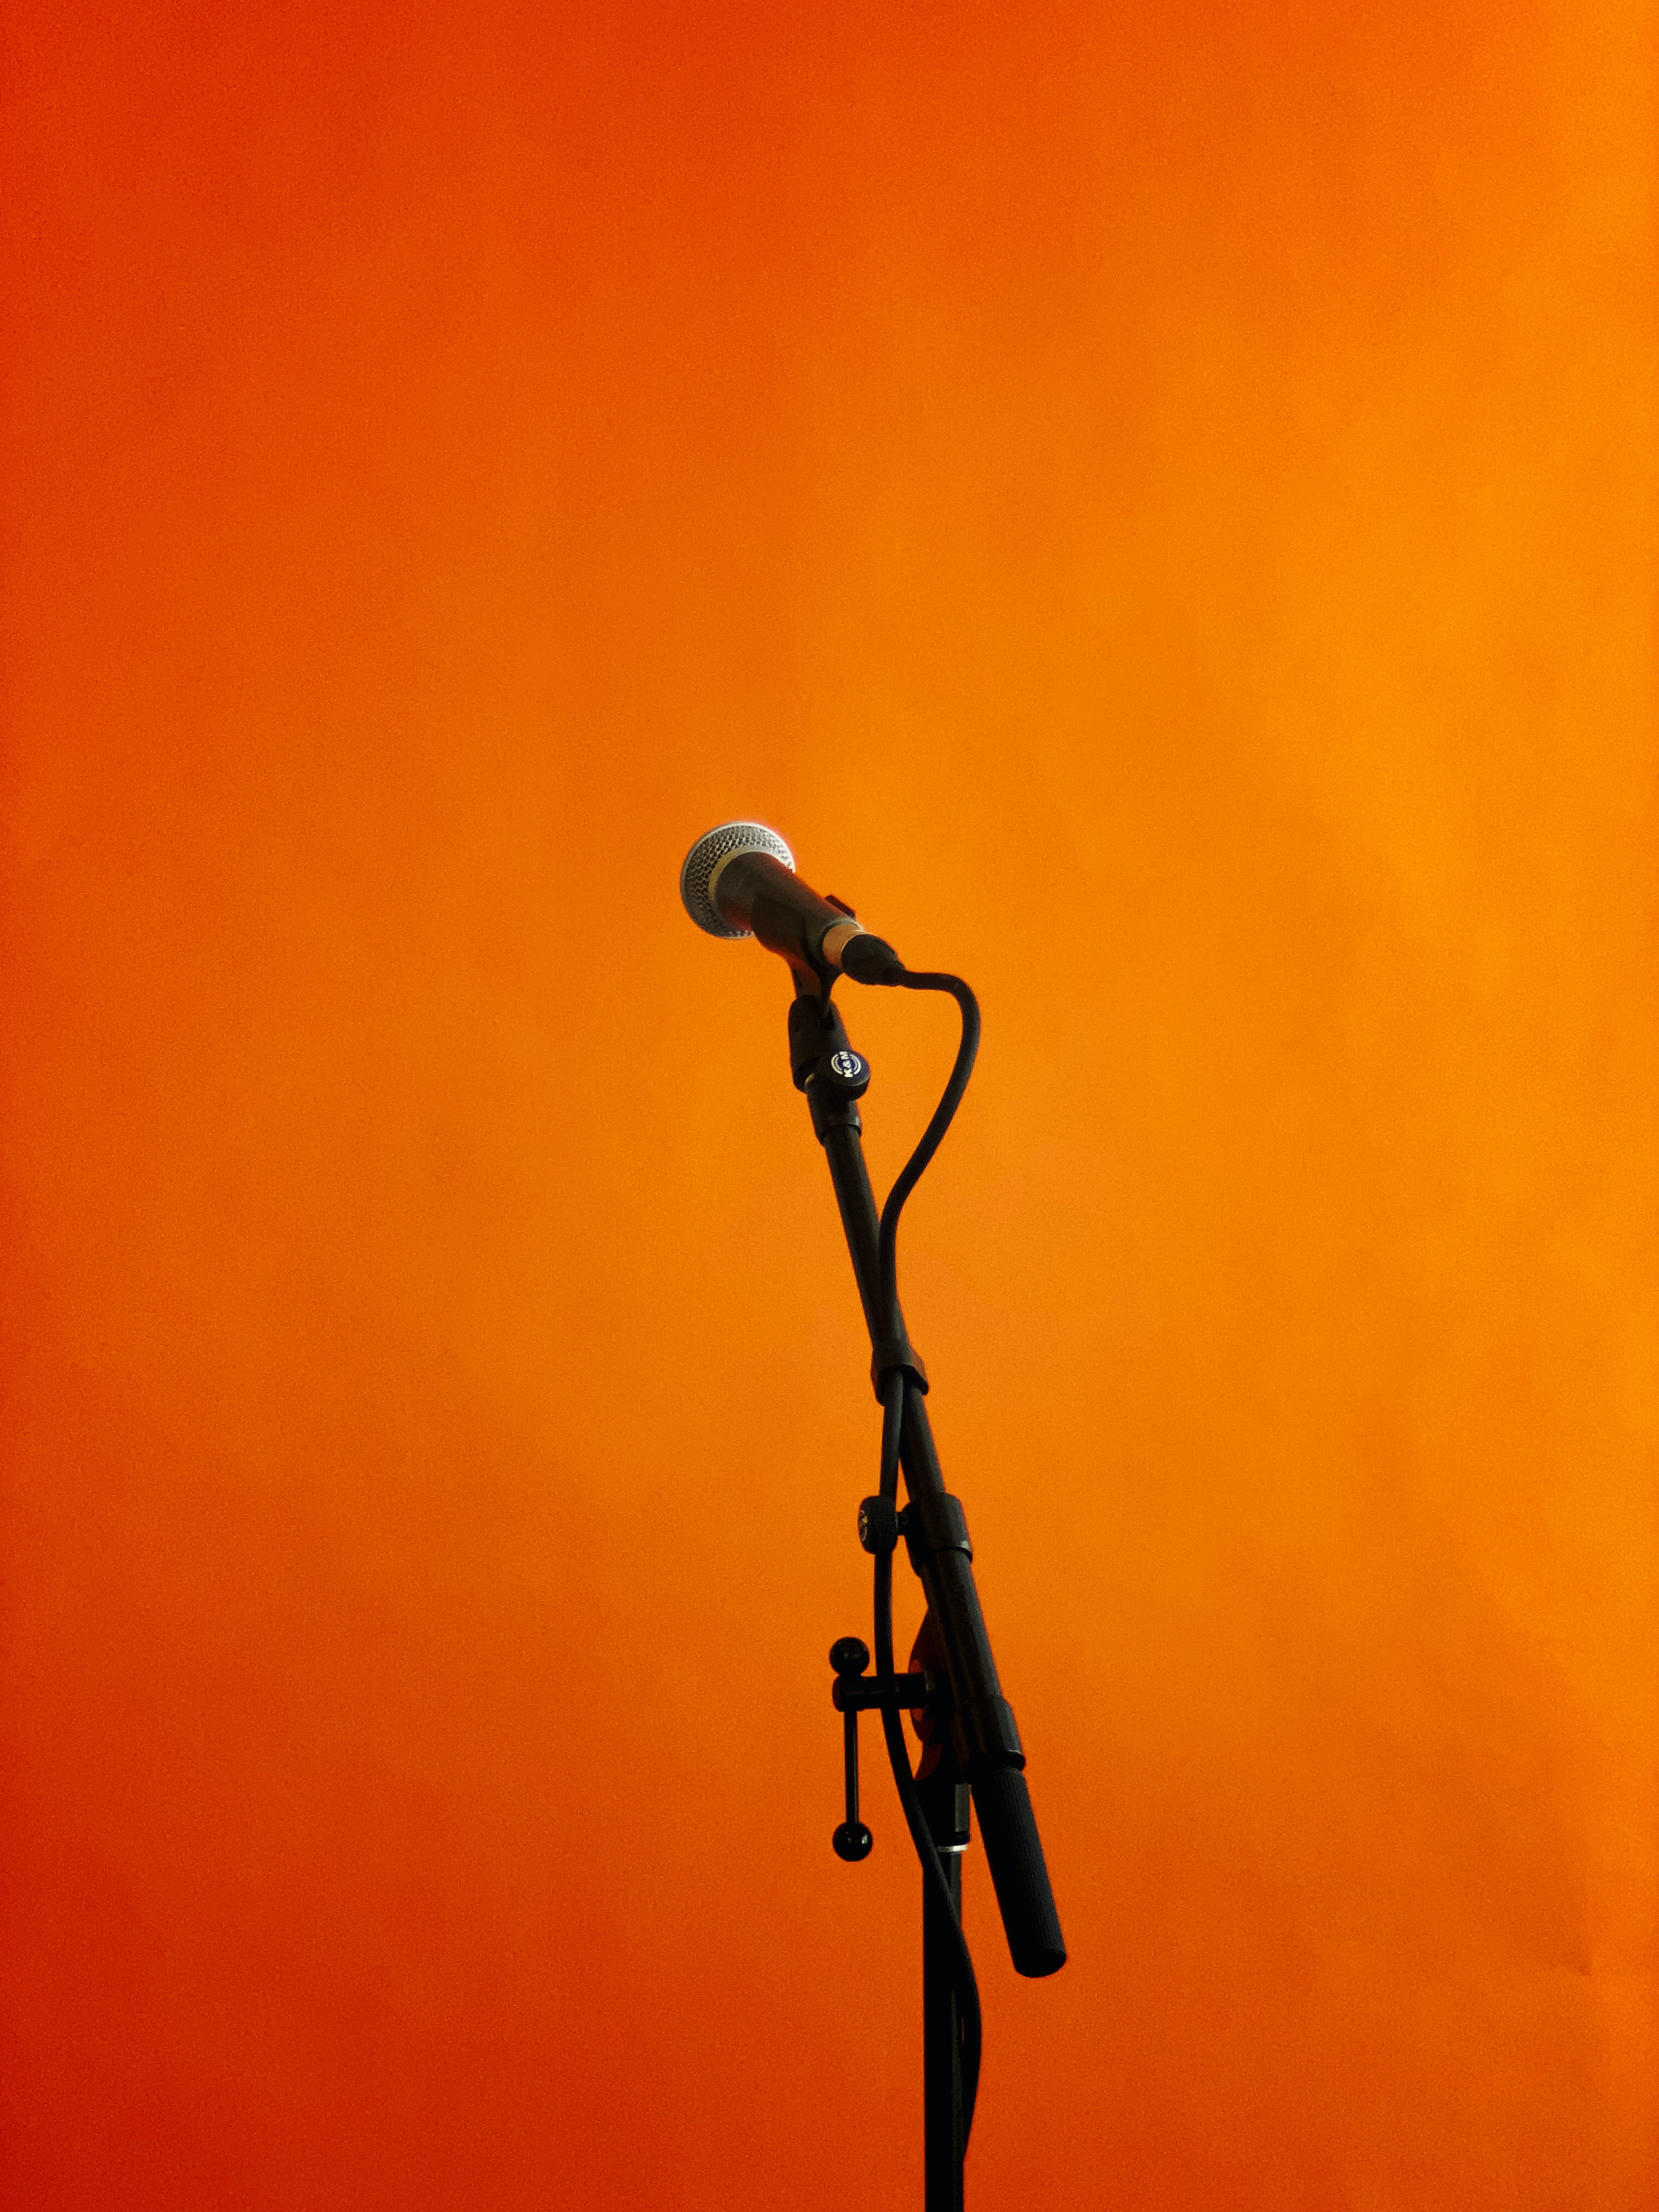 standing microphone in front of orange background